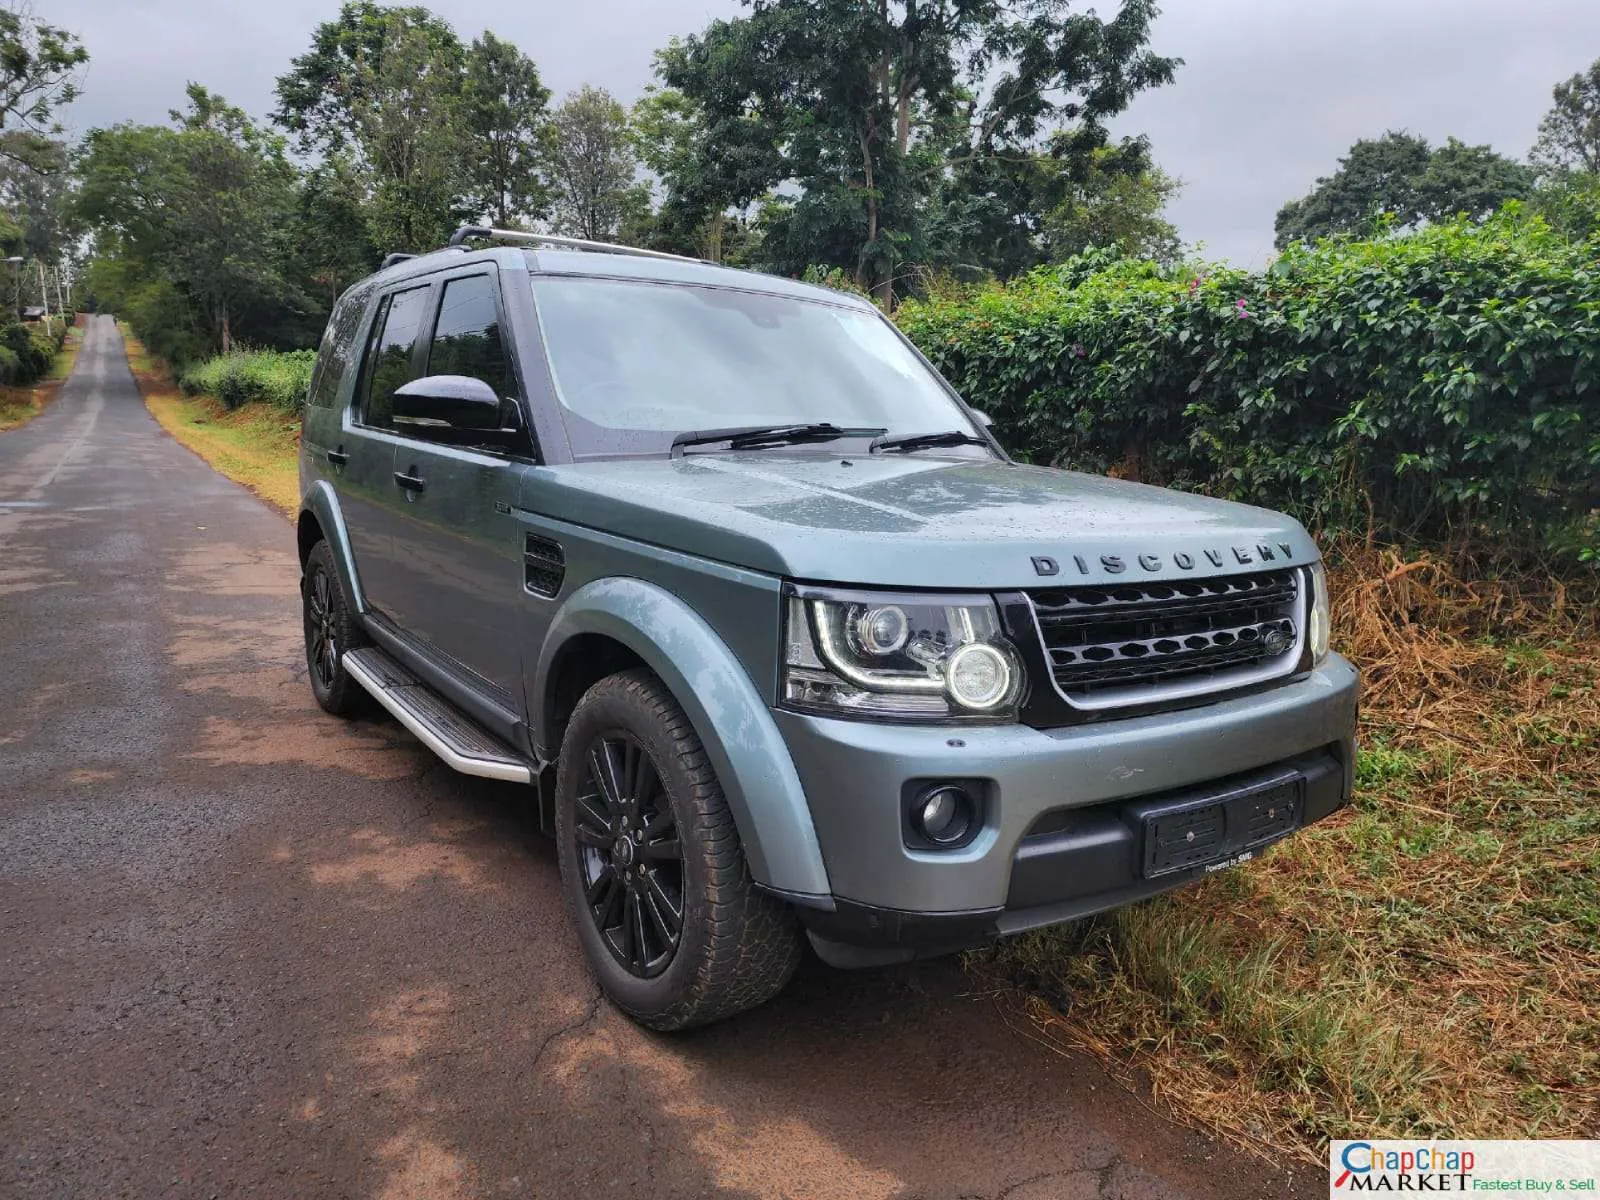 Land Rover Discovery 4 for sale in Kenya HSE QUICK SALE Triple SUNROOF You Pay 30% Deposit Trade in Ok hire purchase installments